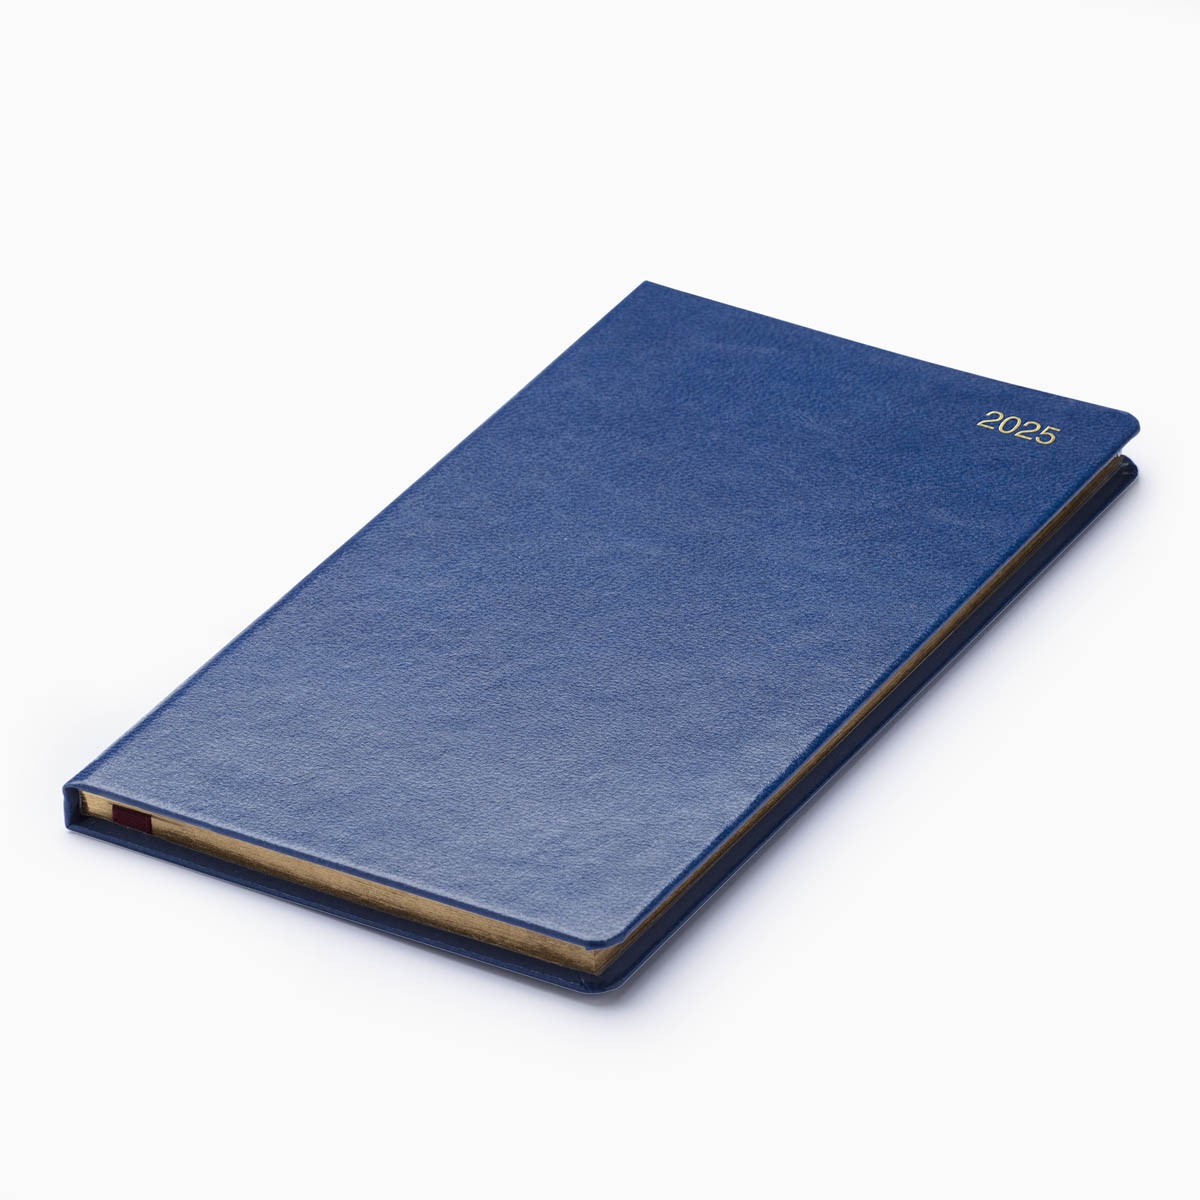 Strata Deluxe Pocket Diary - Cream Pages